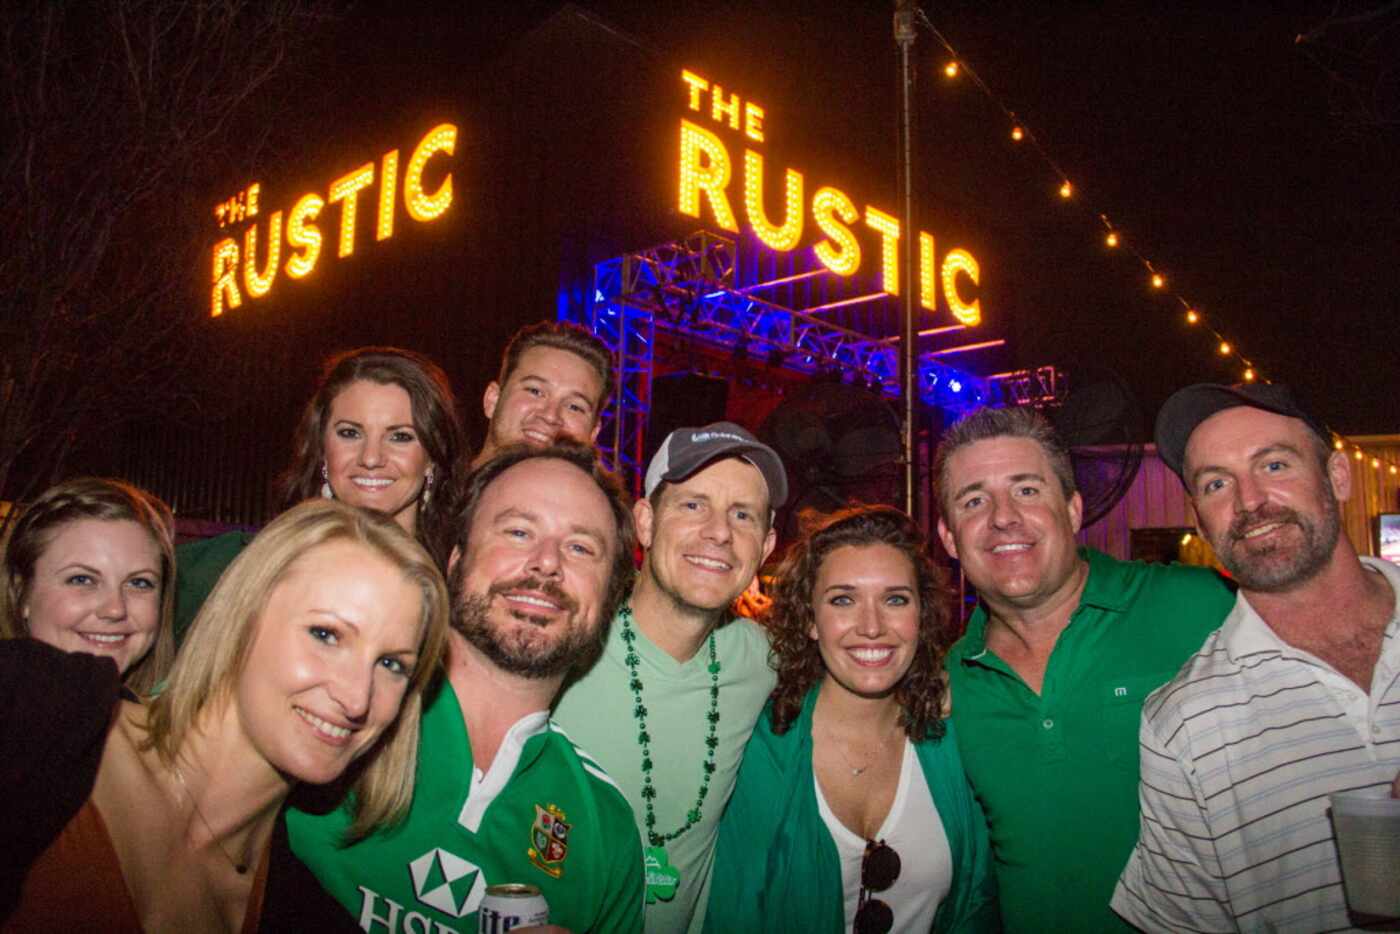 Groups of friends attended St. Patrick's Day party at the Rustic on March 17, 2015.